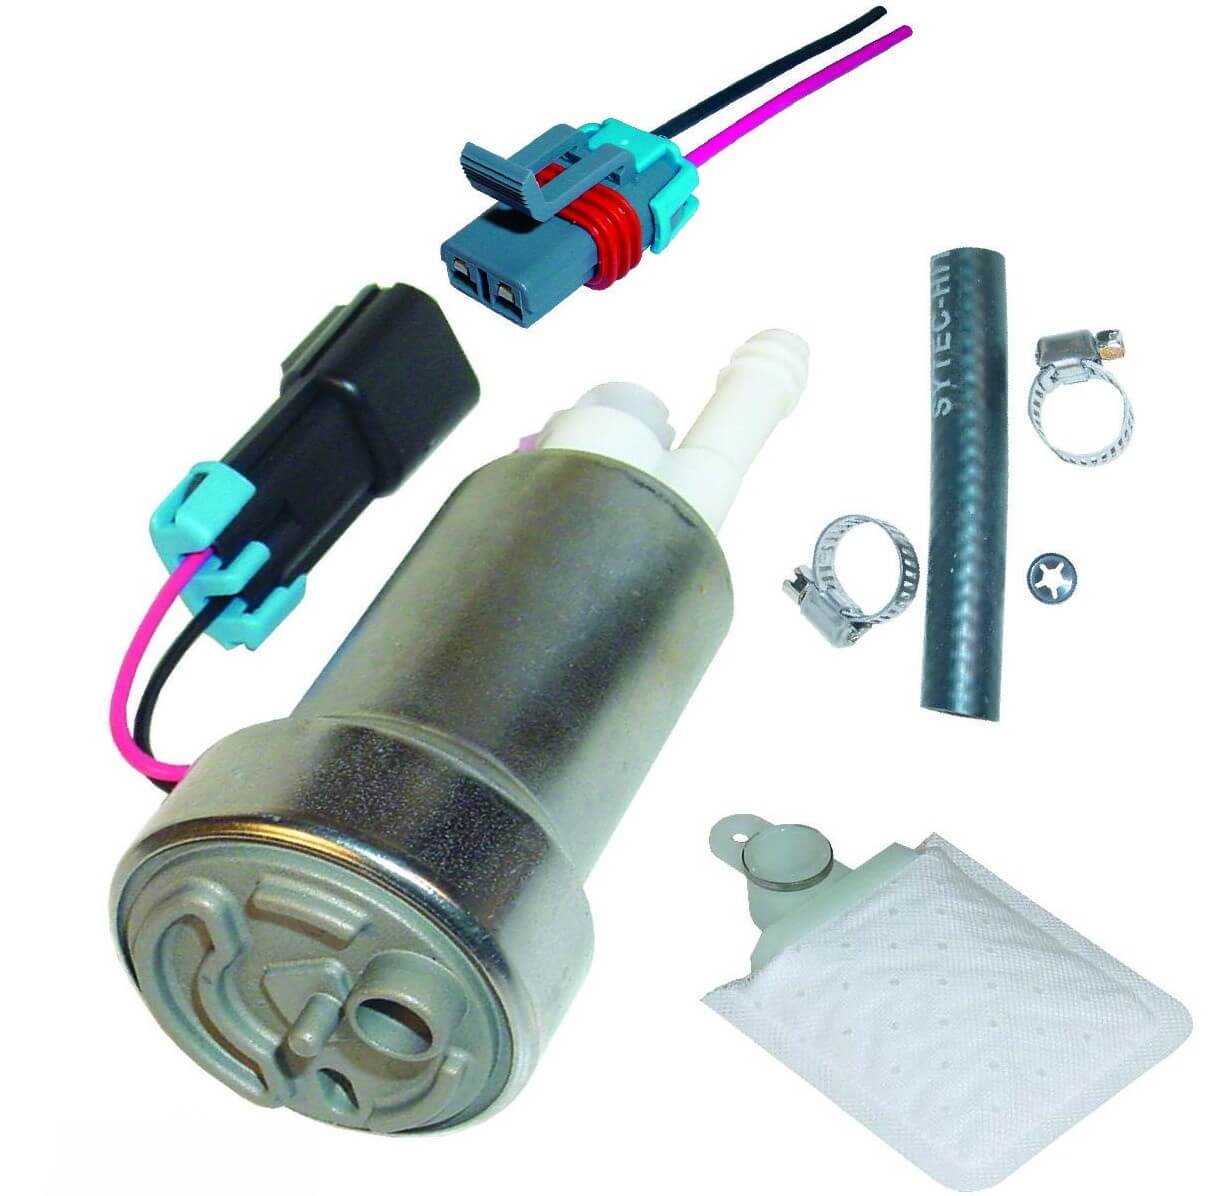 WALBRO GST450-KL Competition in-tank fuel pump kit 450 Ltr/Hr Photo-0 